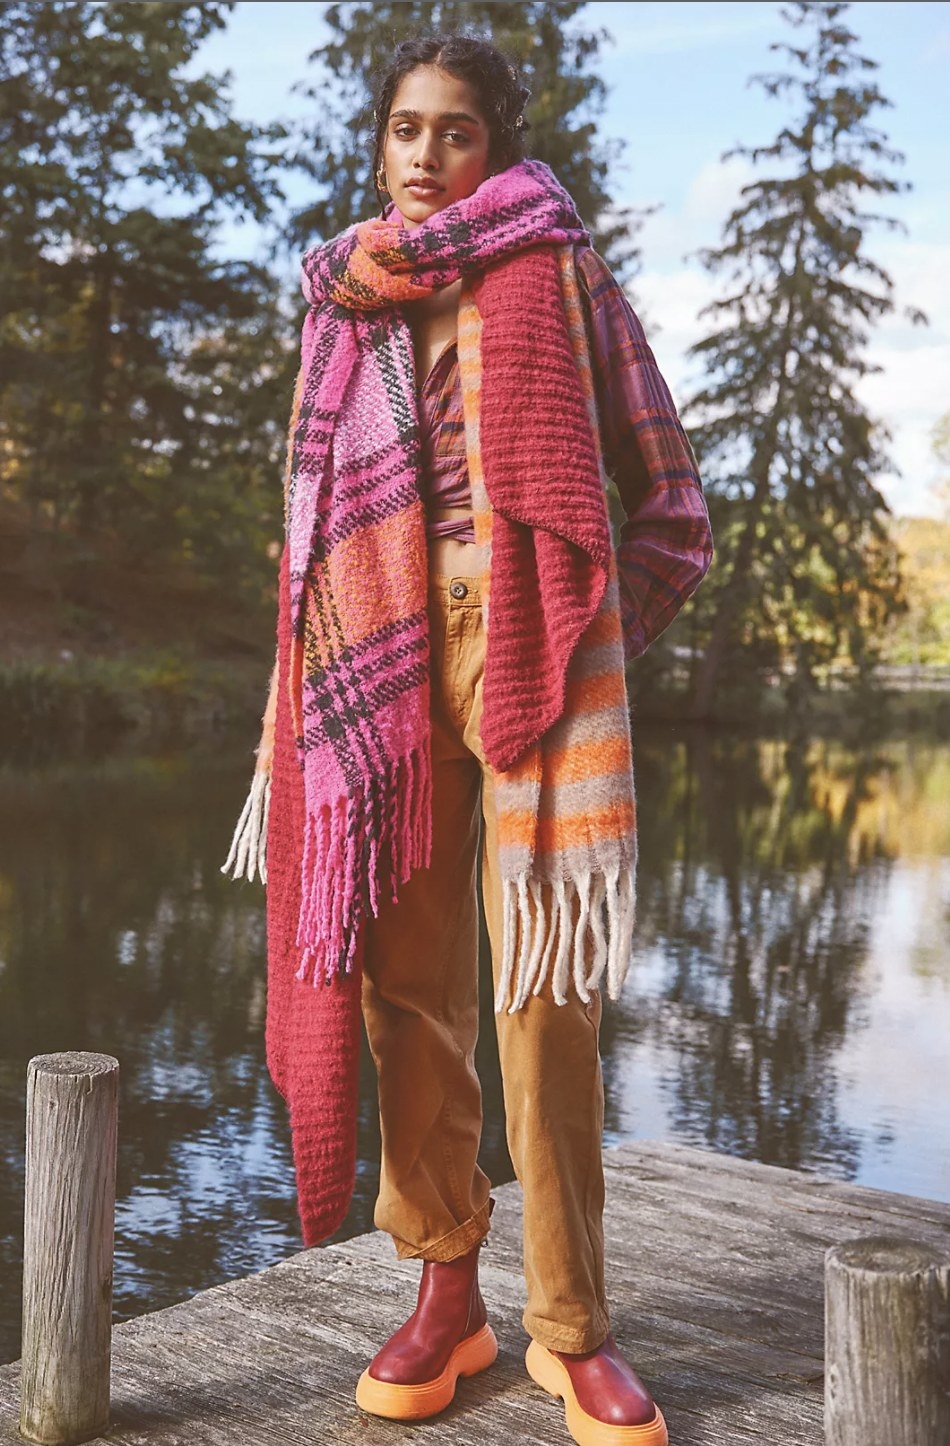 Model wearing the pink plaid scarf draped over her neck and tied once, with fringed edges hanging down